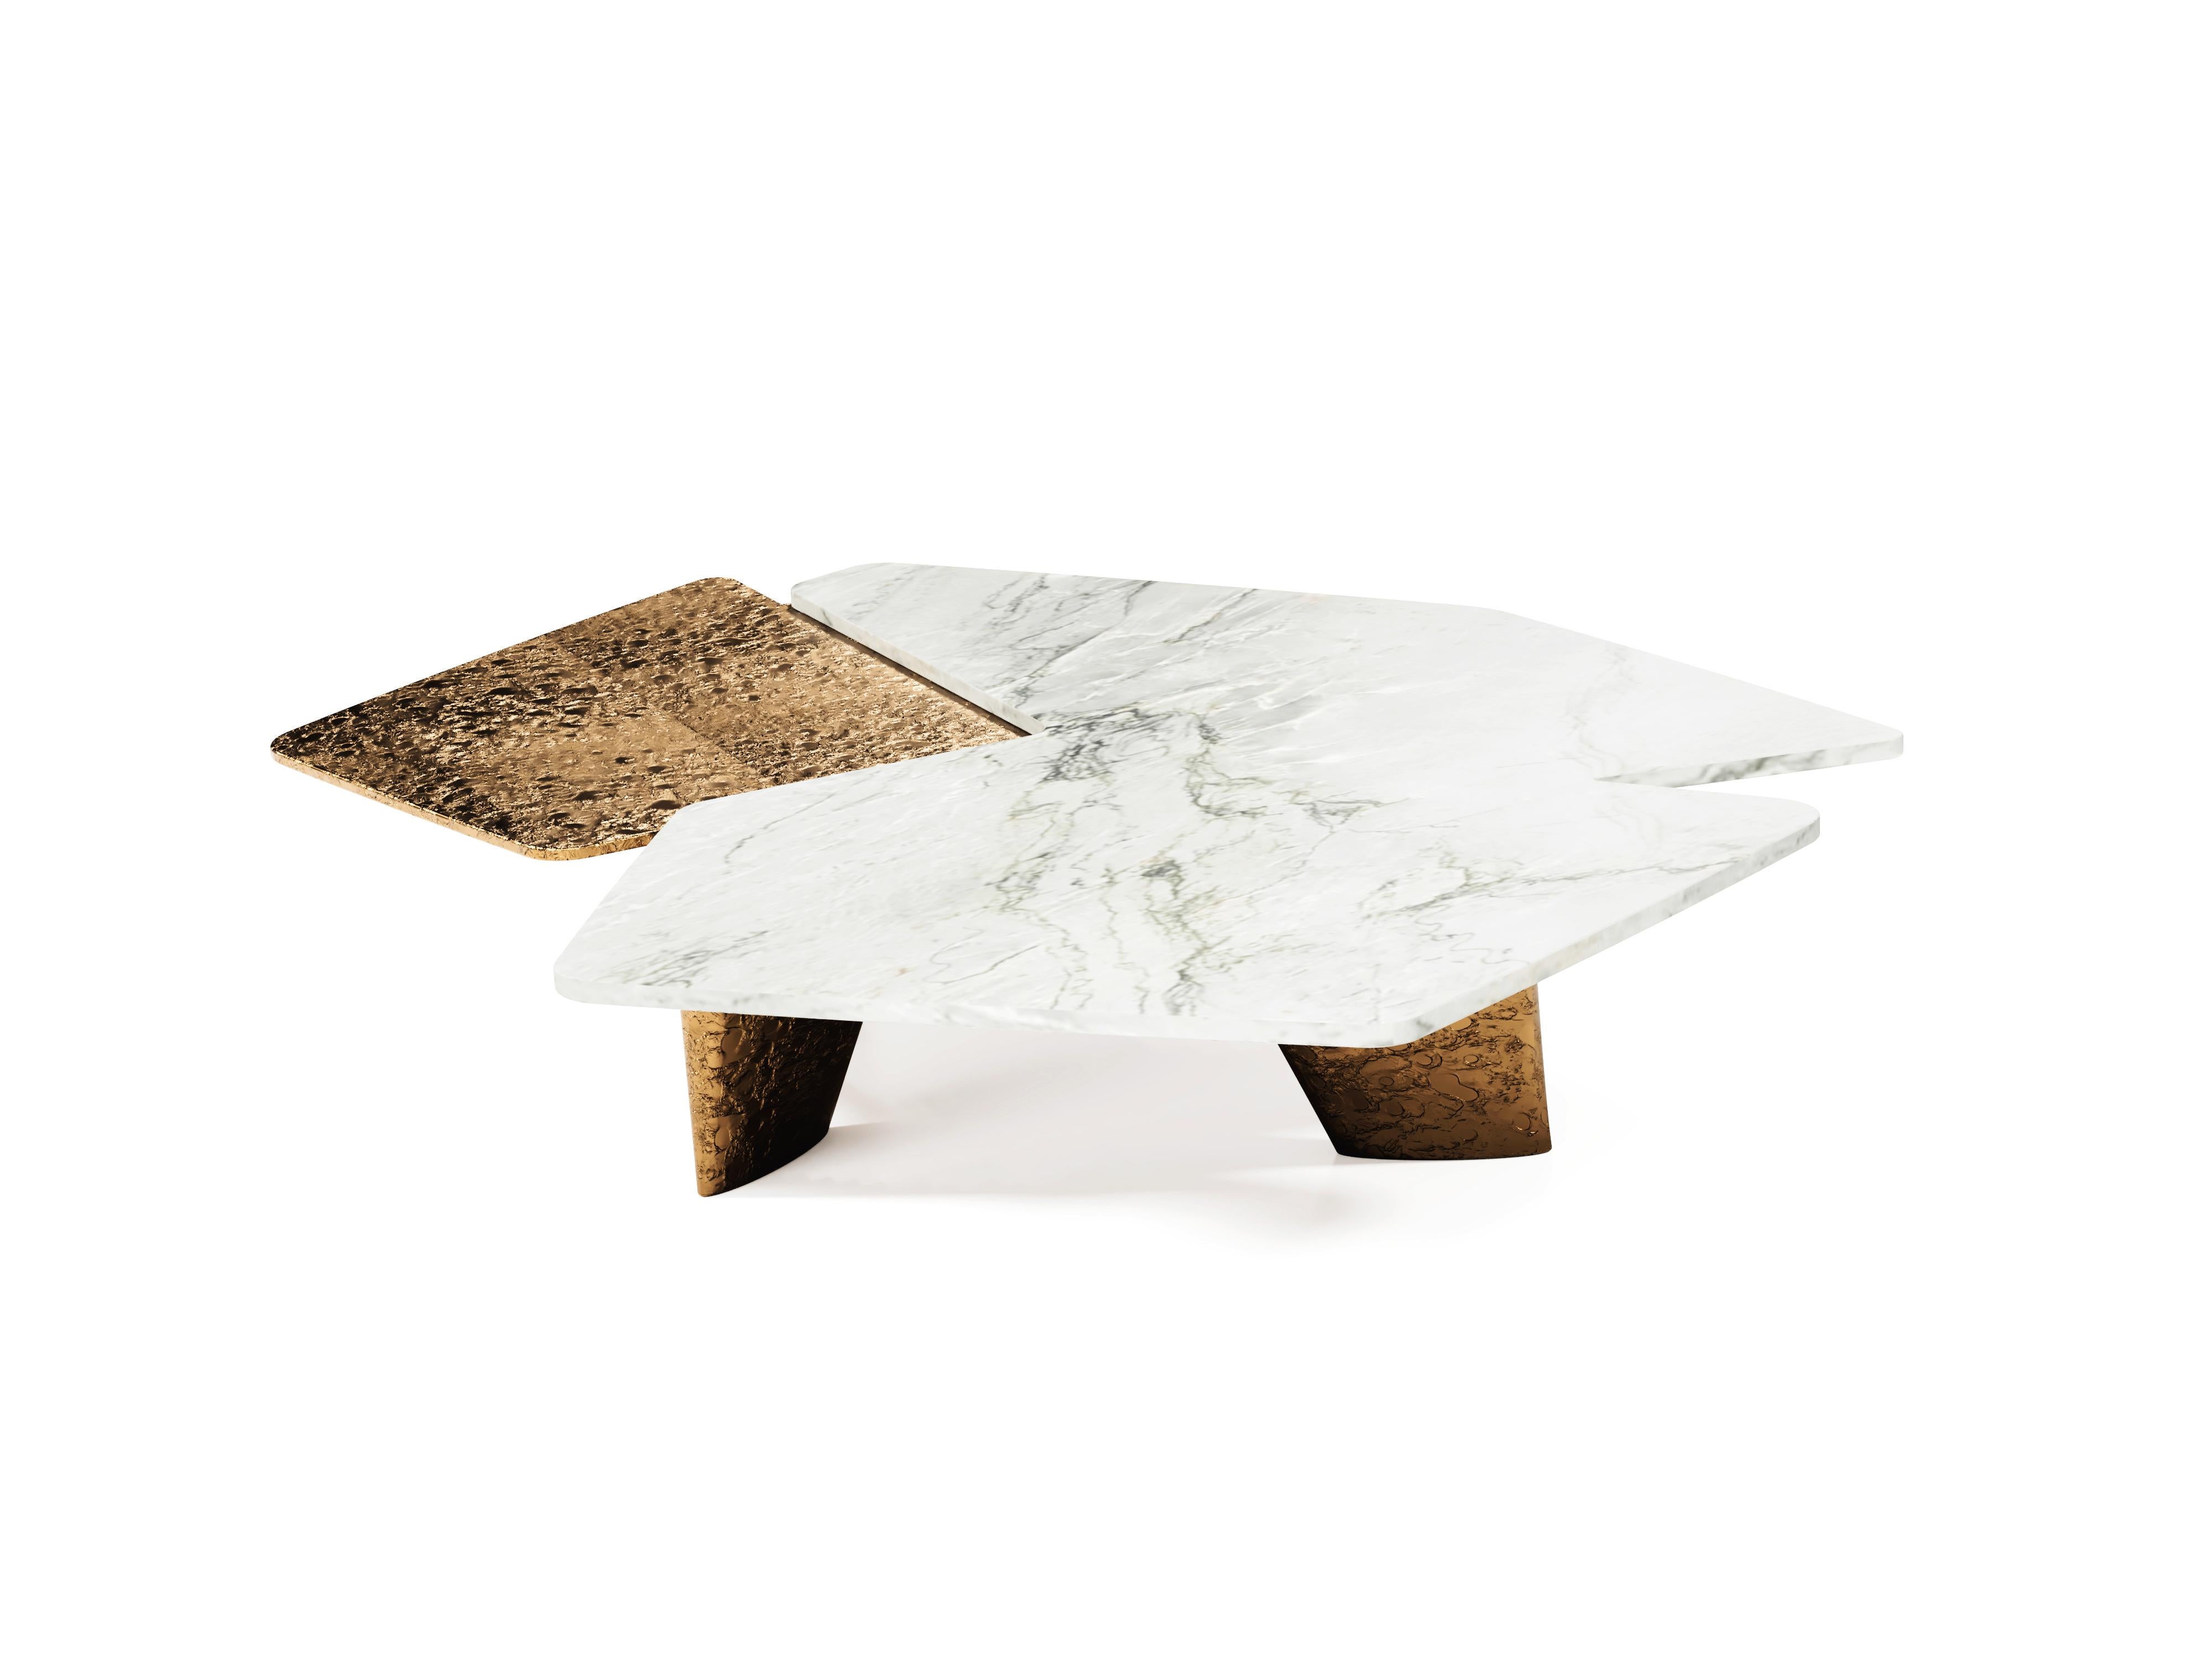 The Elements I coffee table, 1 of 1 by Grzegorz Majka
Edition 1 of 1
Dimensions: 53.14 x 37.40 x 10.04 in
Materials: Aluminium, quartz and brass

“The Elements I” is one of a kind and one of the series of various coffee tables that will be